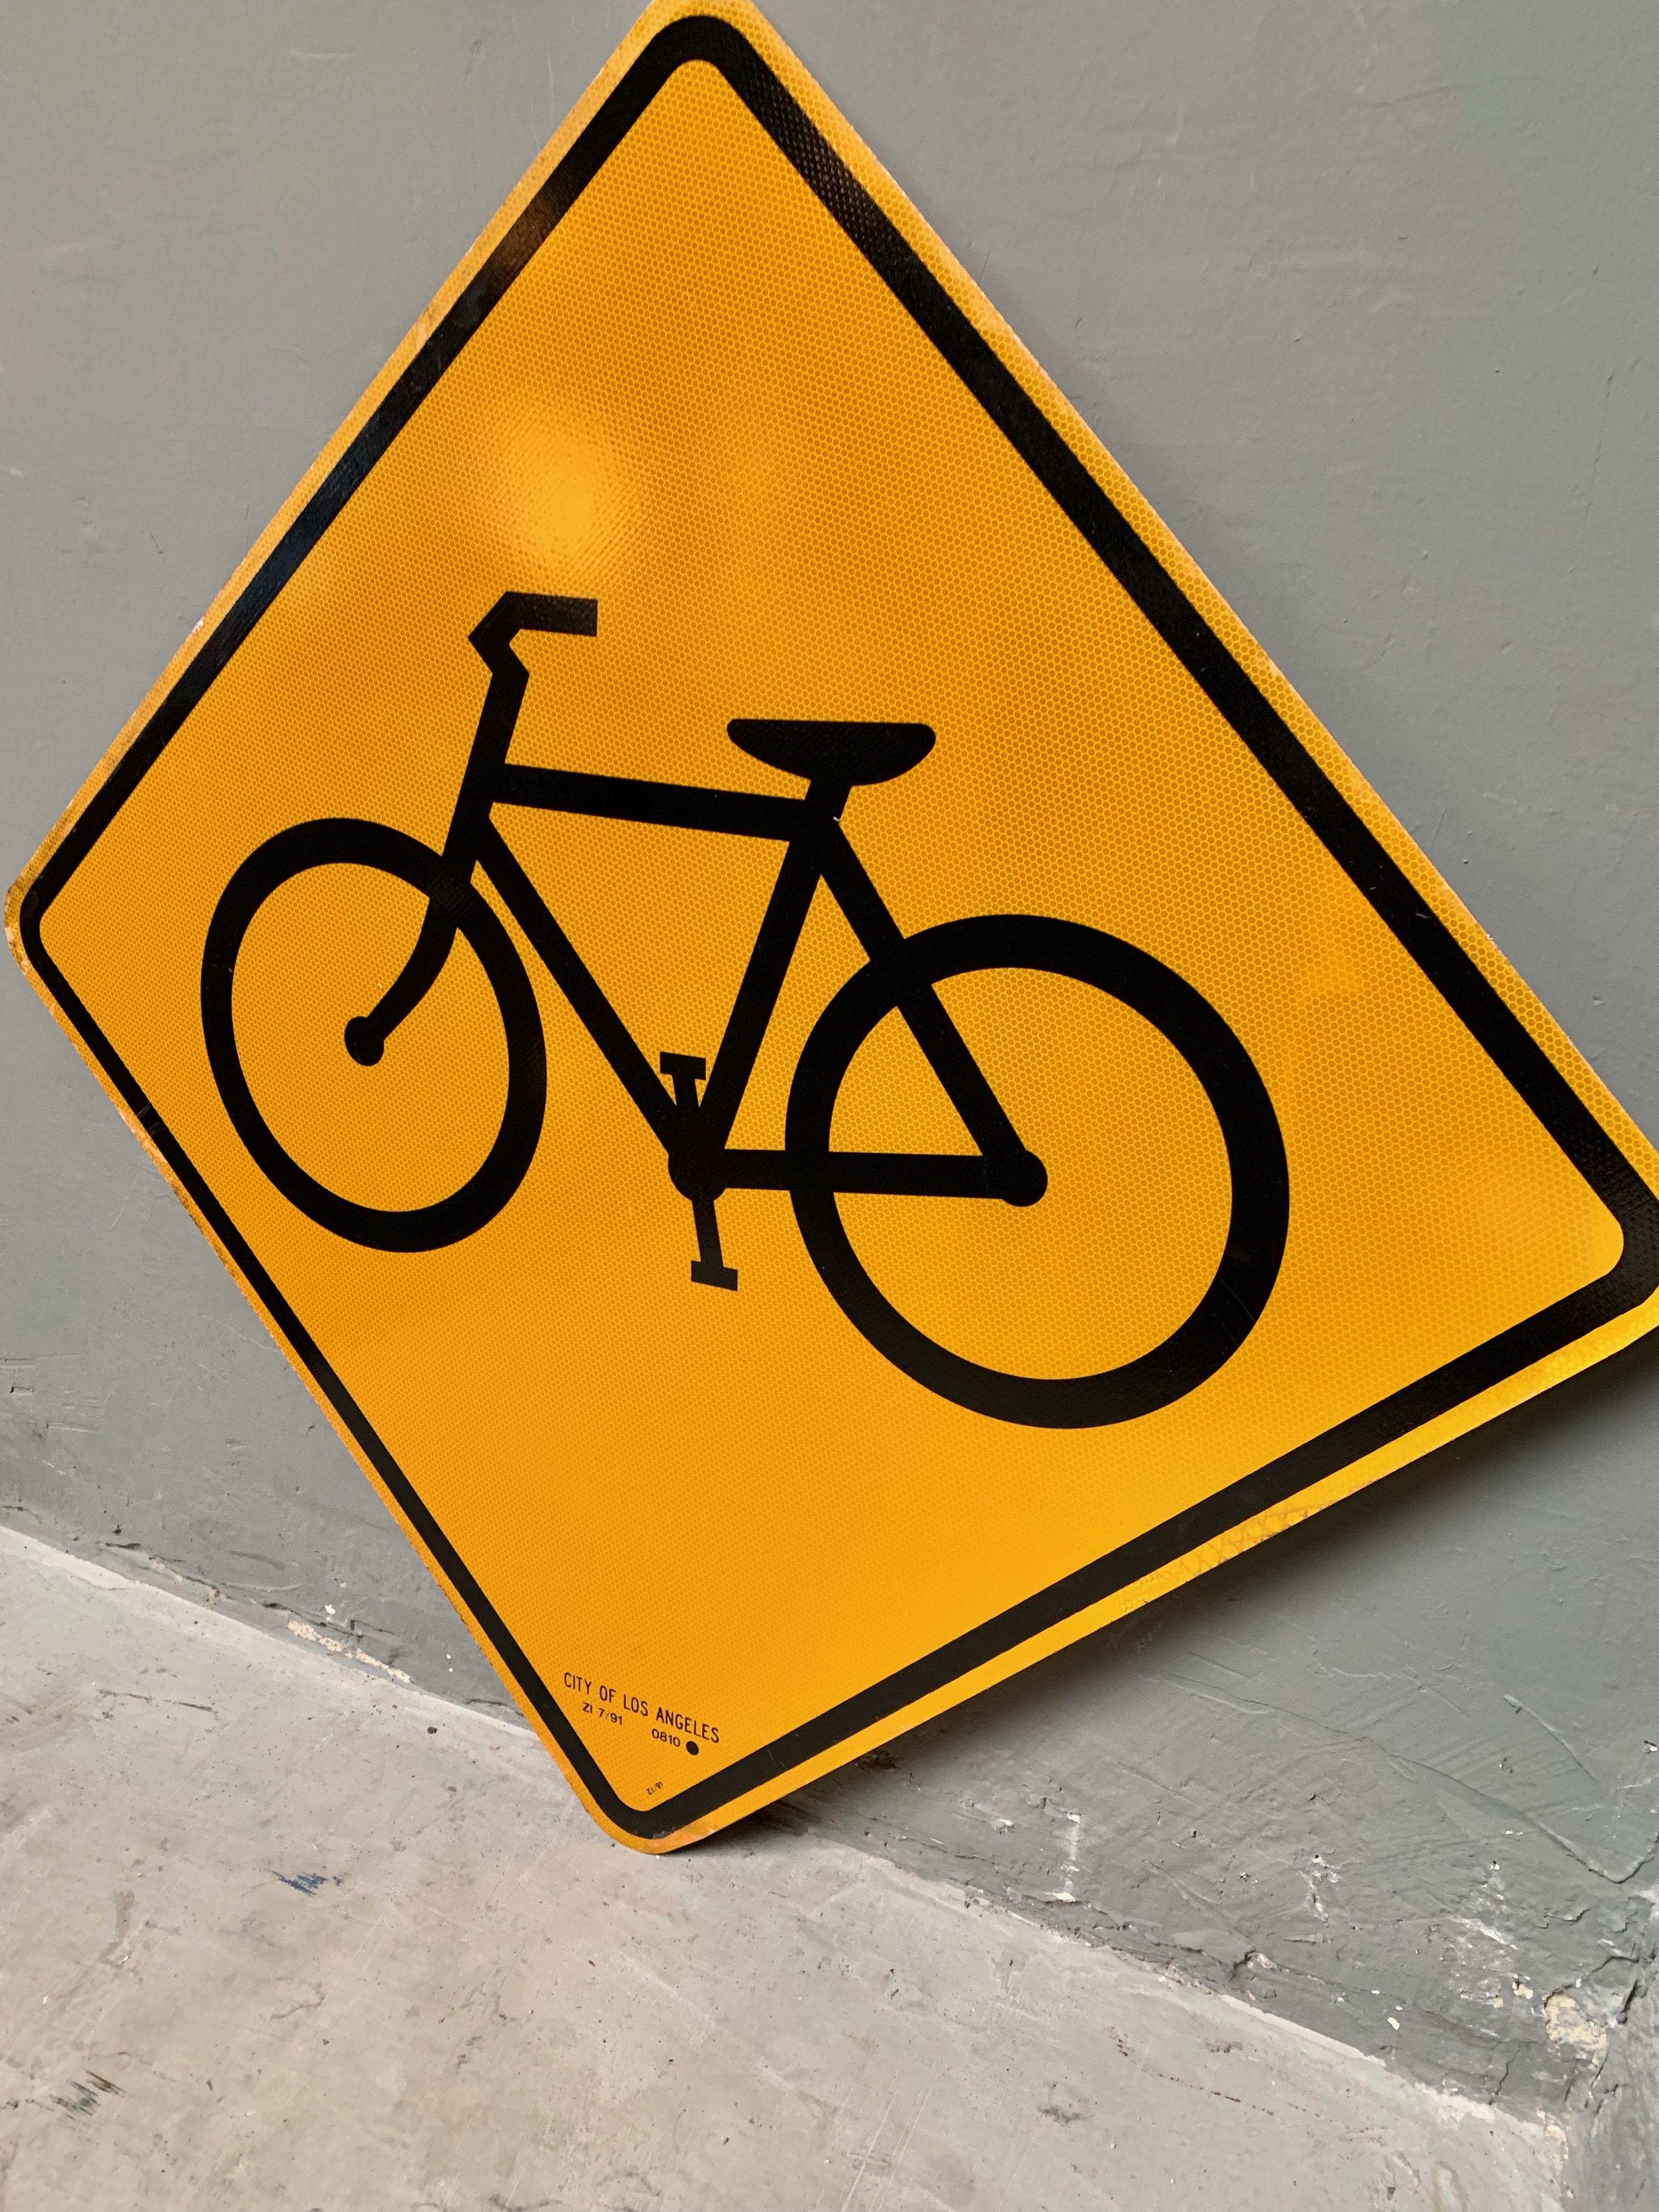 Massive yellow bike sign from Los Angeles. Large black bike on a yellow reflective background. Marked 'City of Los Angeles' and 1991 on the front. Great coloring and subject matter. Measures: 41